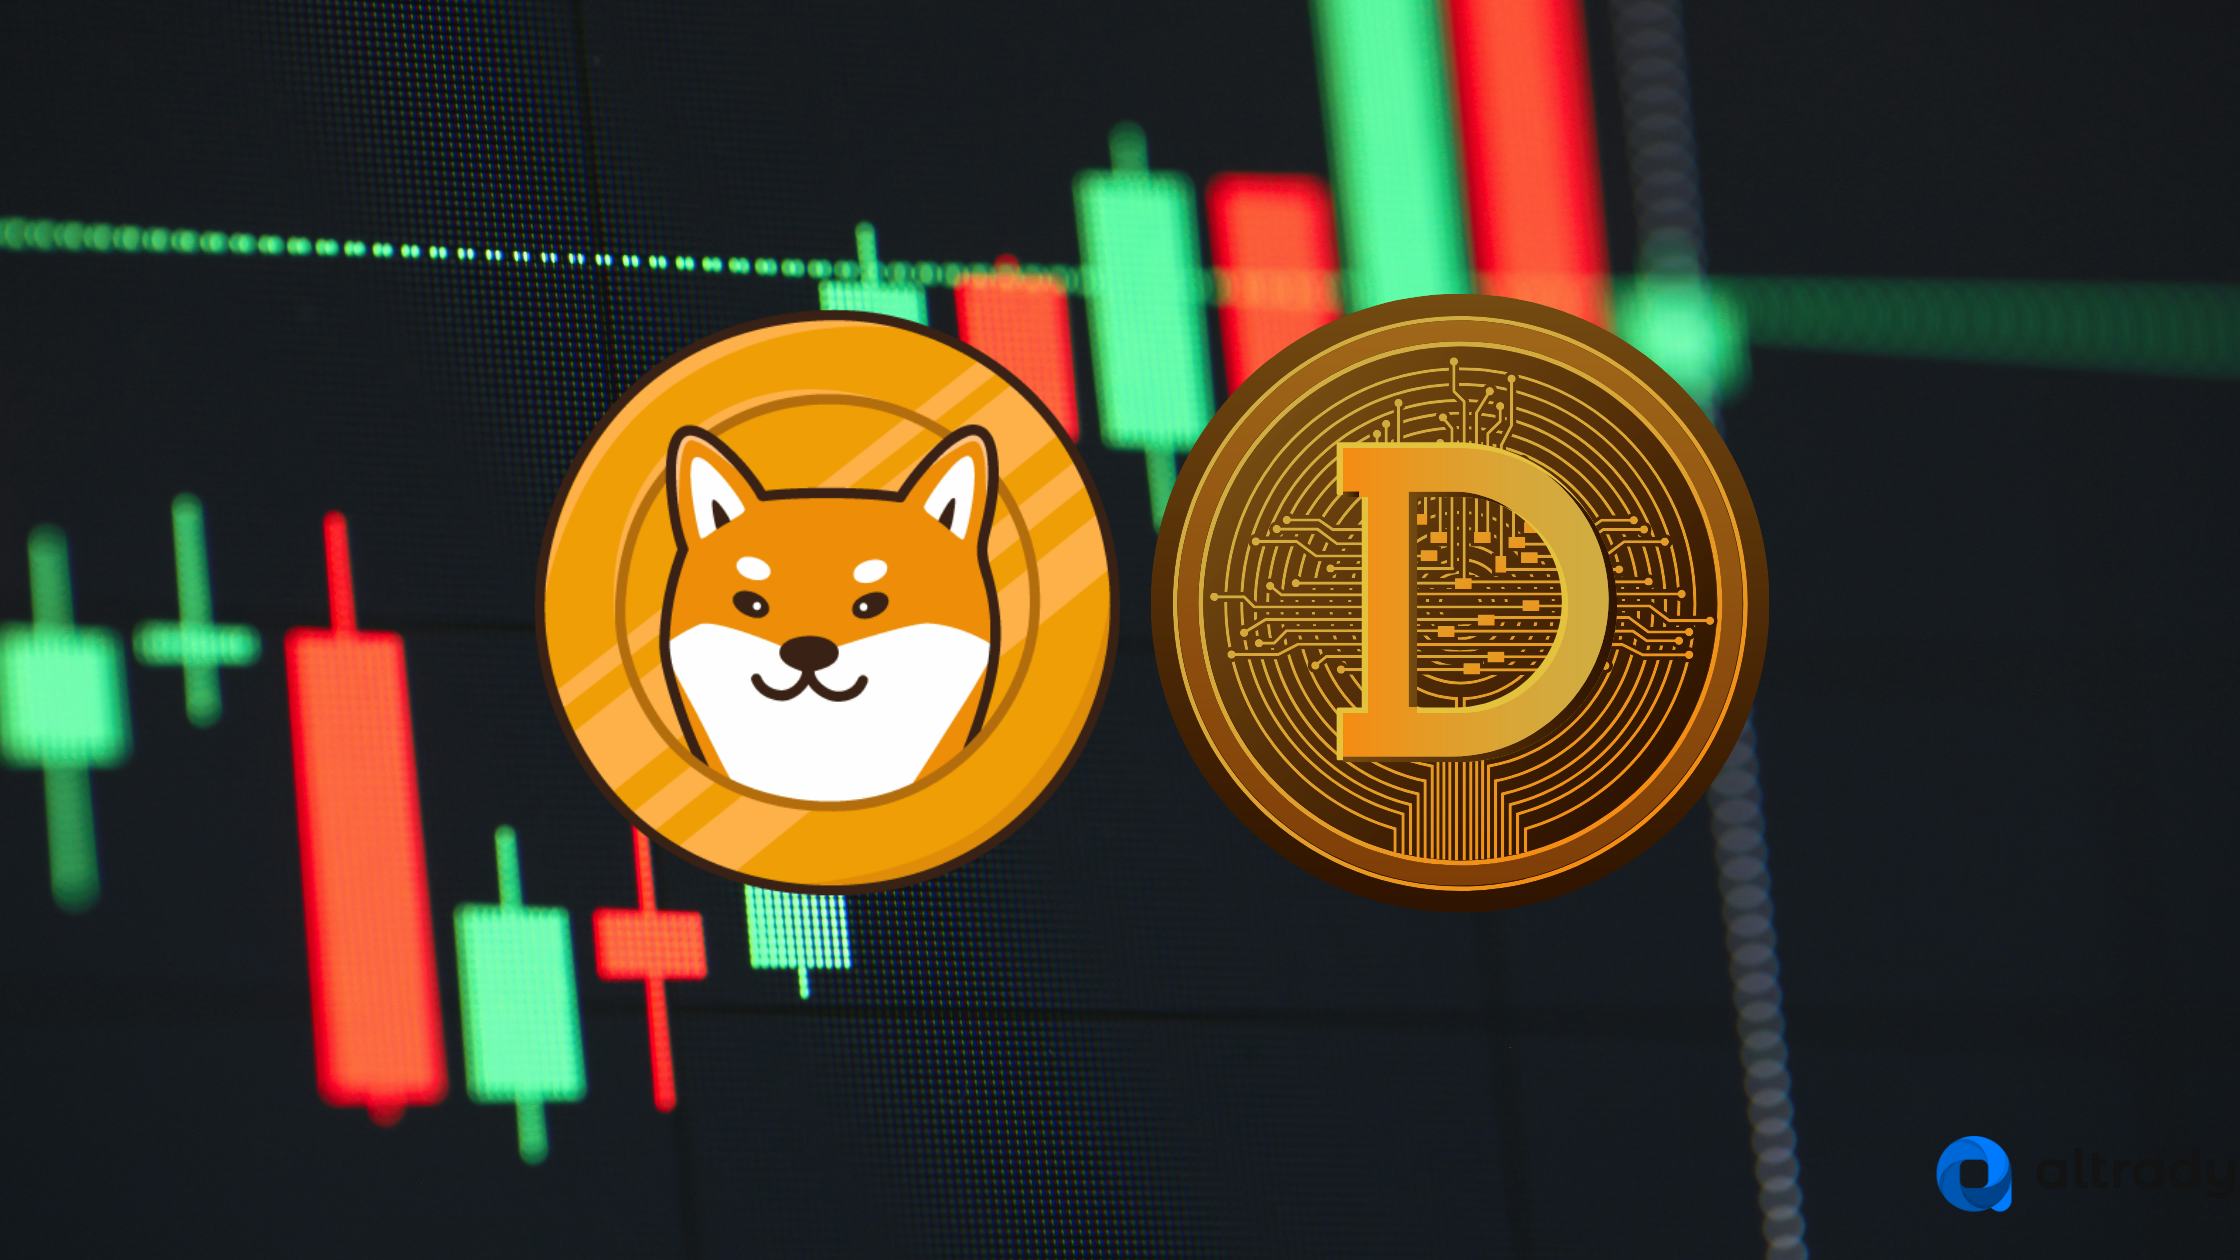 Shiba Inu and Dogecoin Can Now Be Traded Against Circle's Stablecoin on MEXC Global